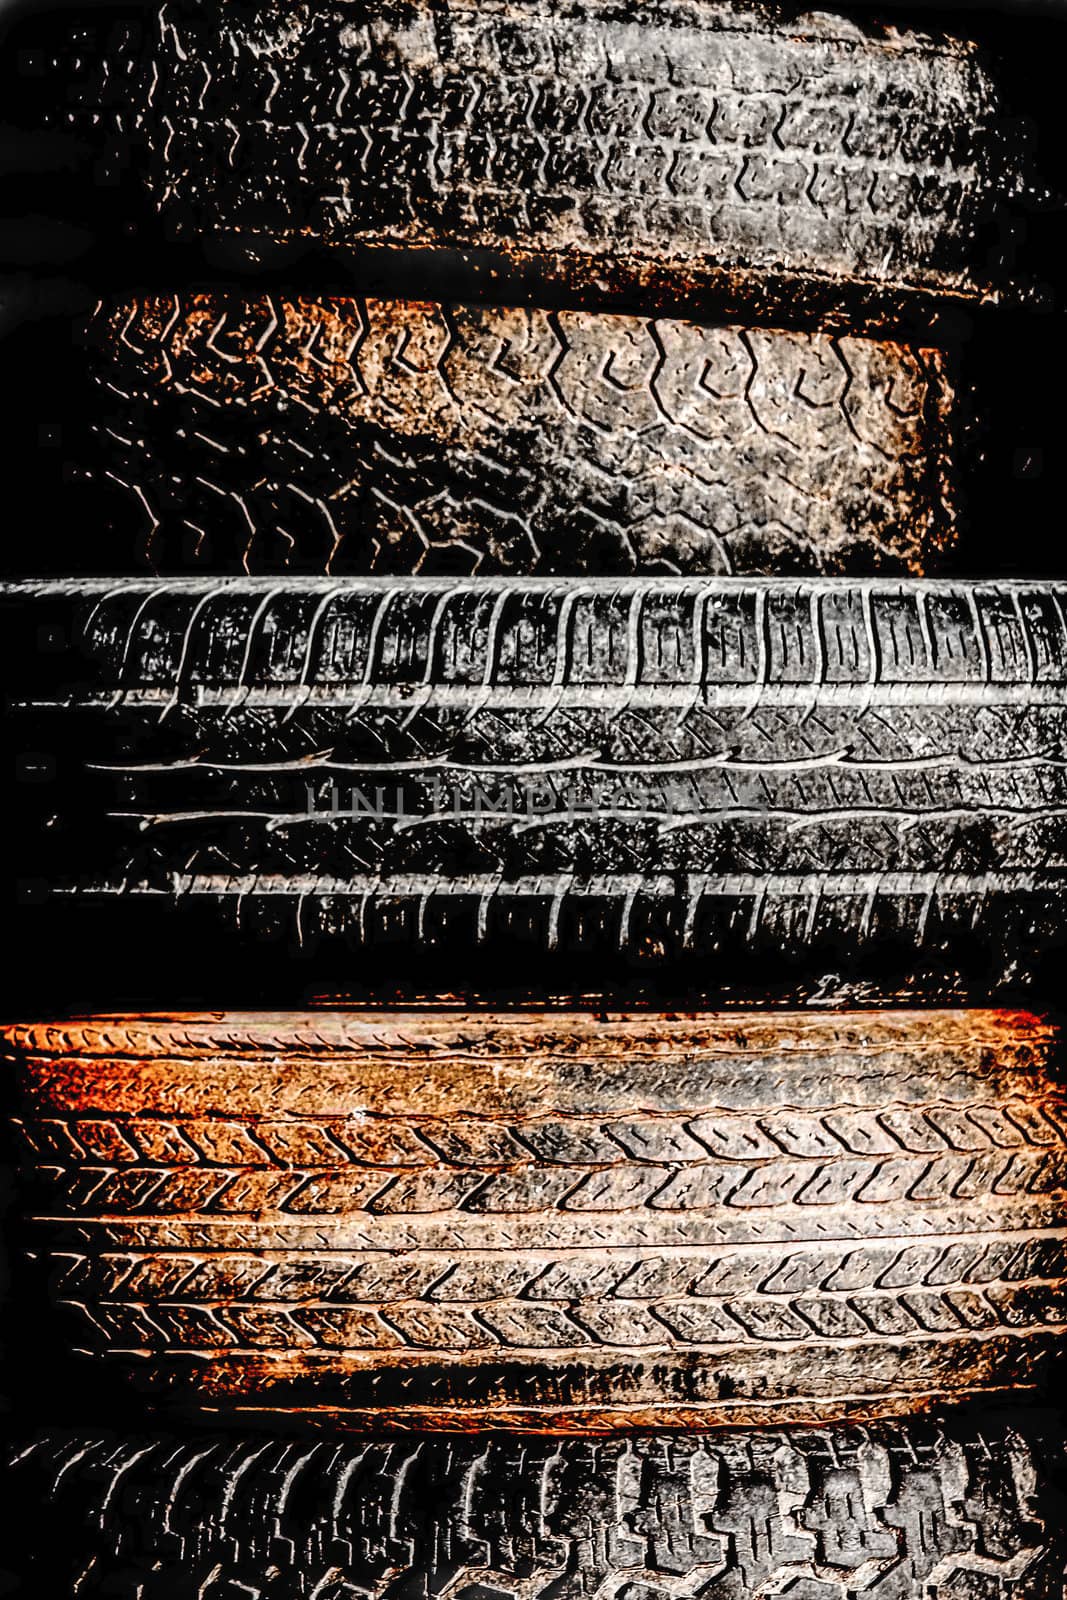 Stacked and Discarded Automotive Tires